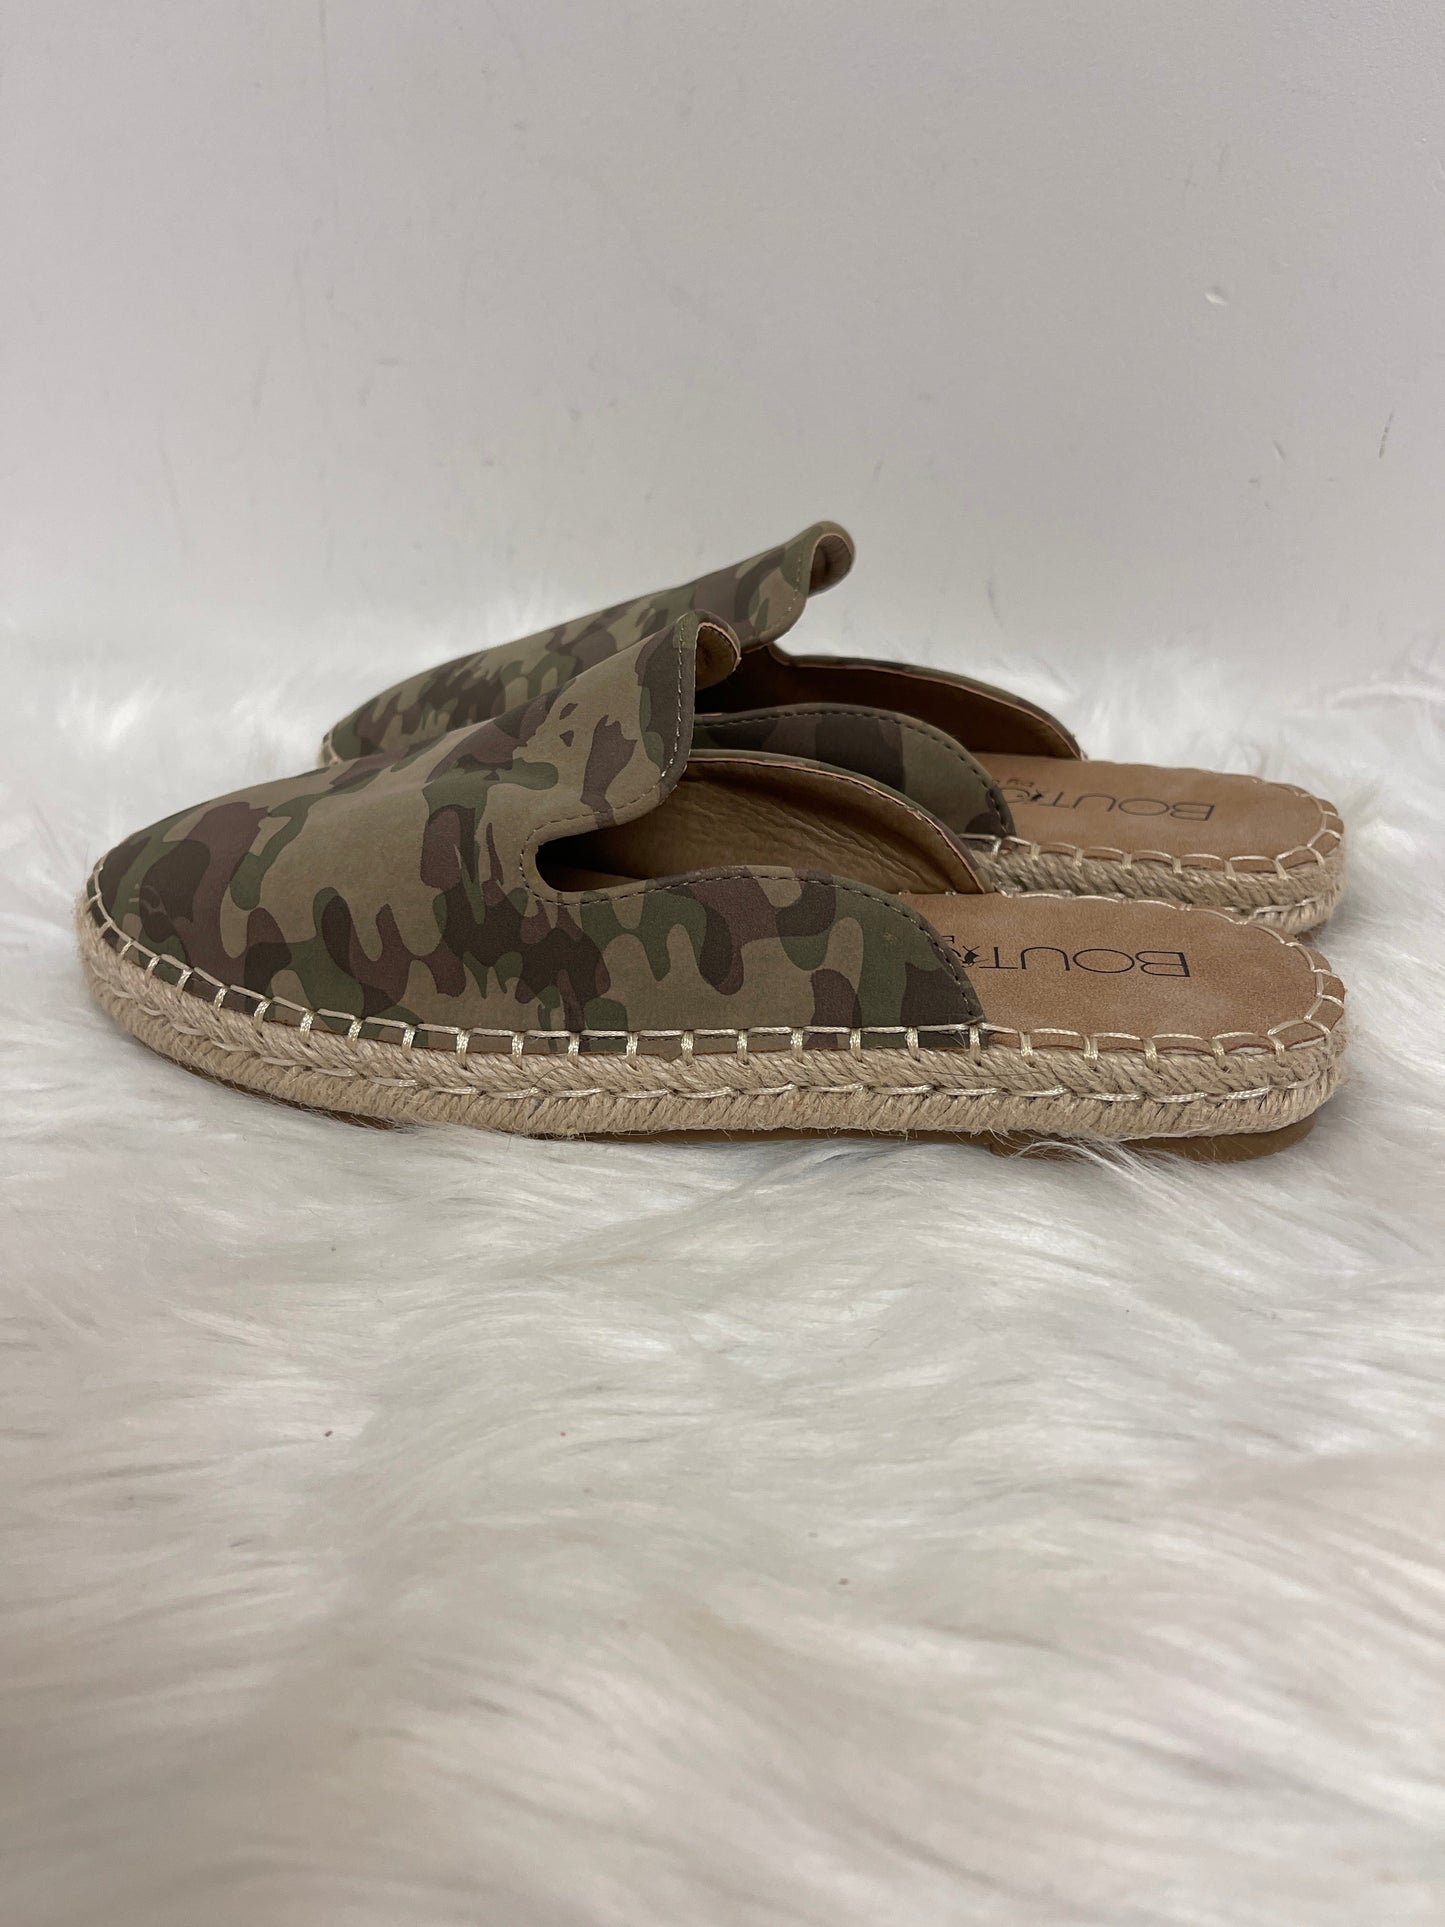 Camouflage Print Shoes Flats Corkys, Size 6